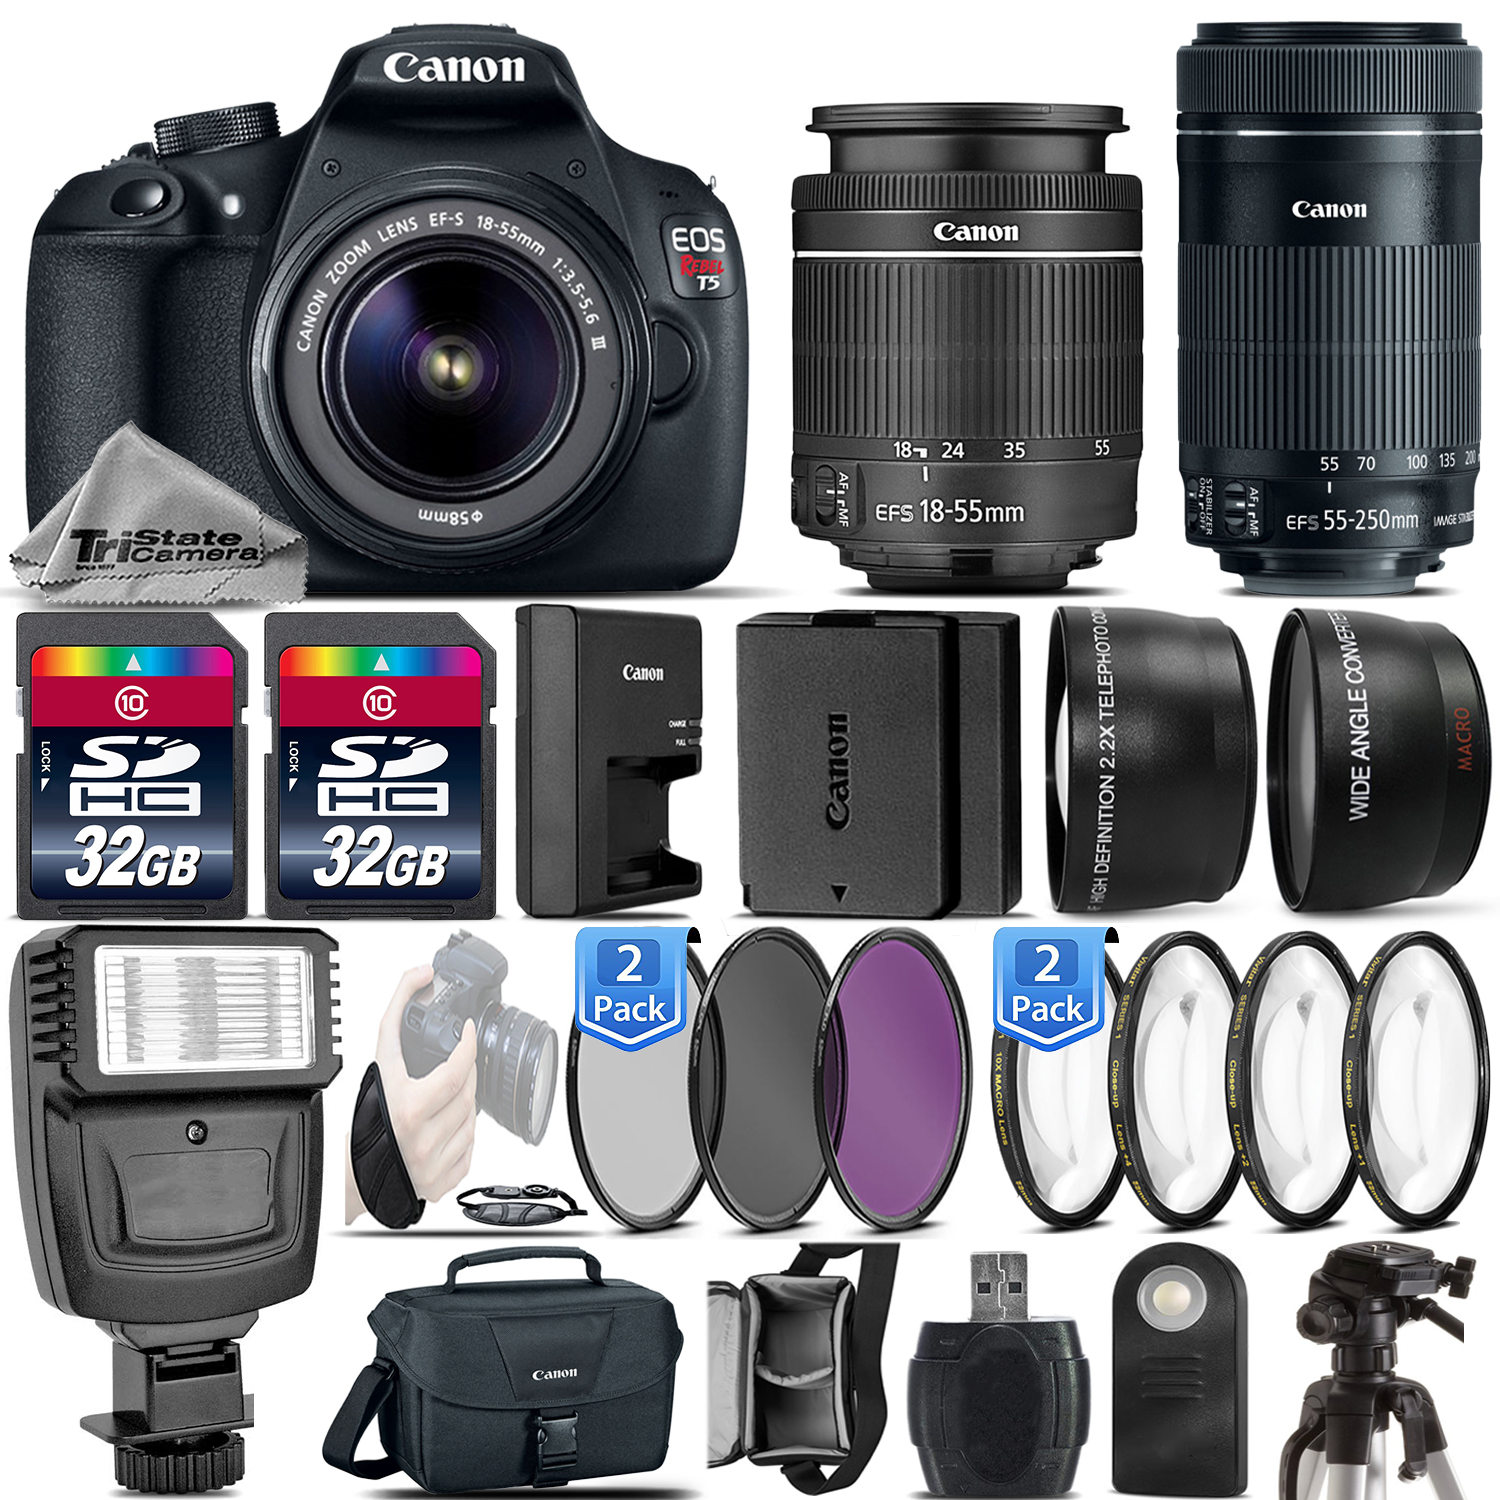 EOS Rebel T5 DSLR Camera + 18-55mm DC III + 55-250mm IS STM - 64GB Kit *FREE SHIPPING*